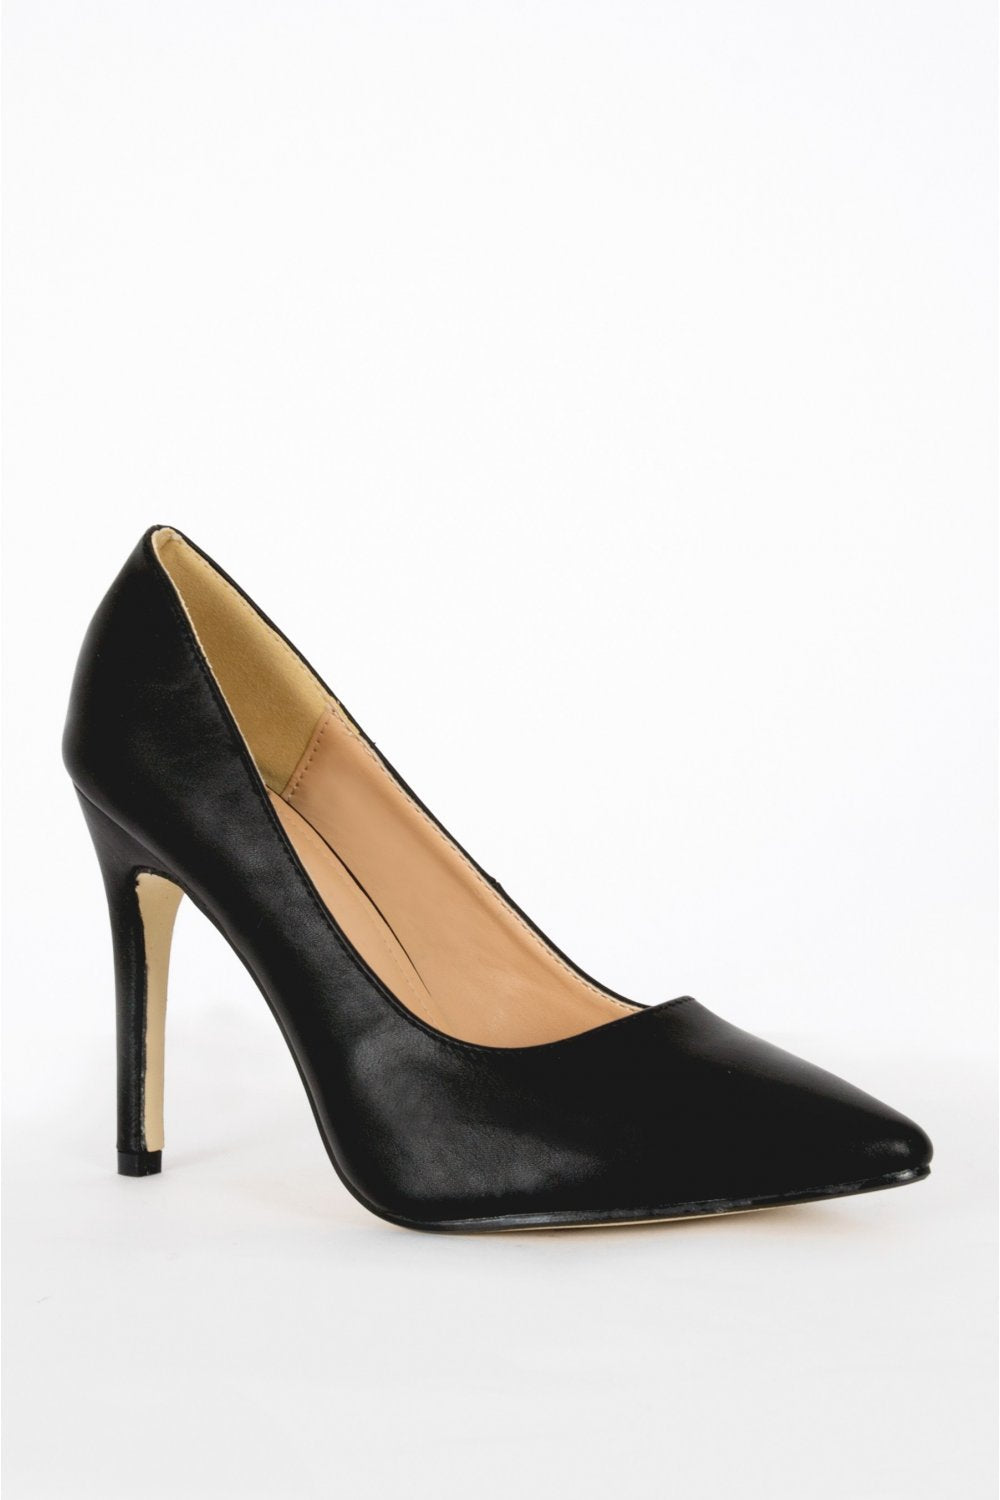 Lanica Black PU Pointed Toe Court Shoes